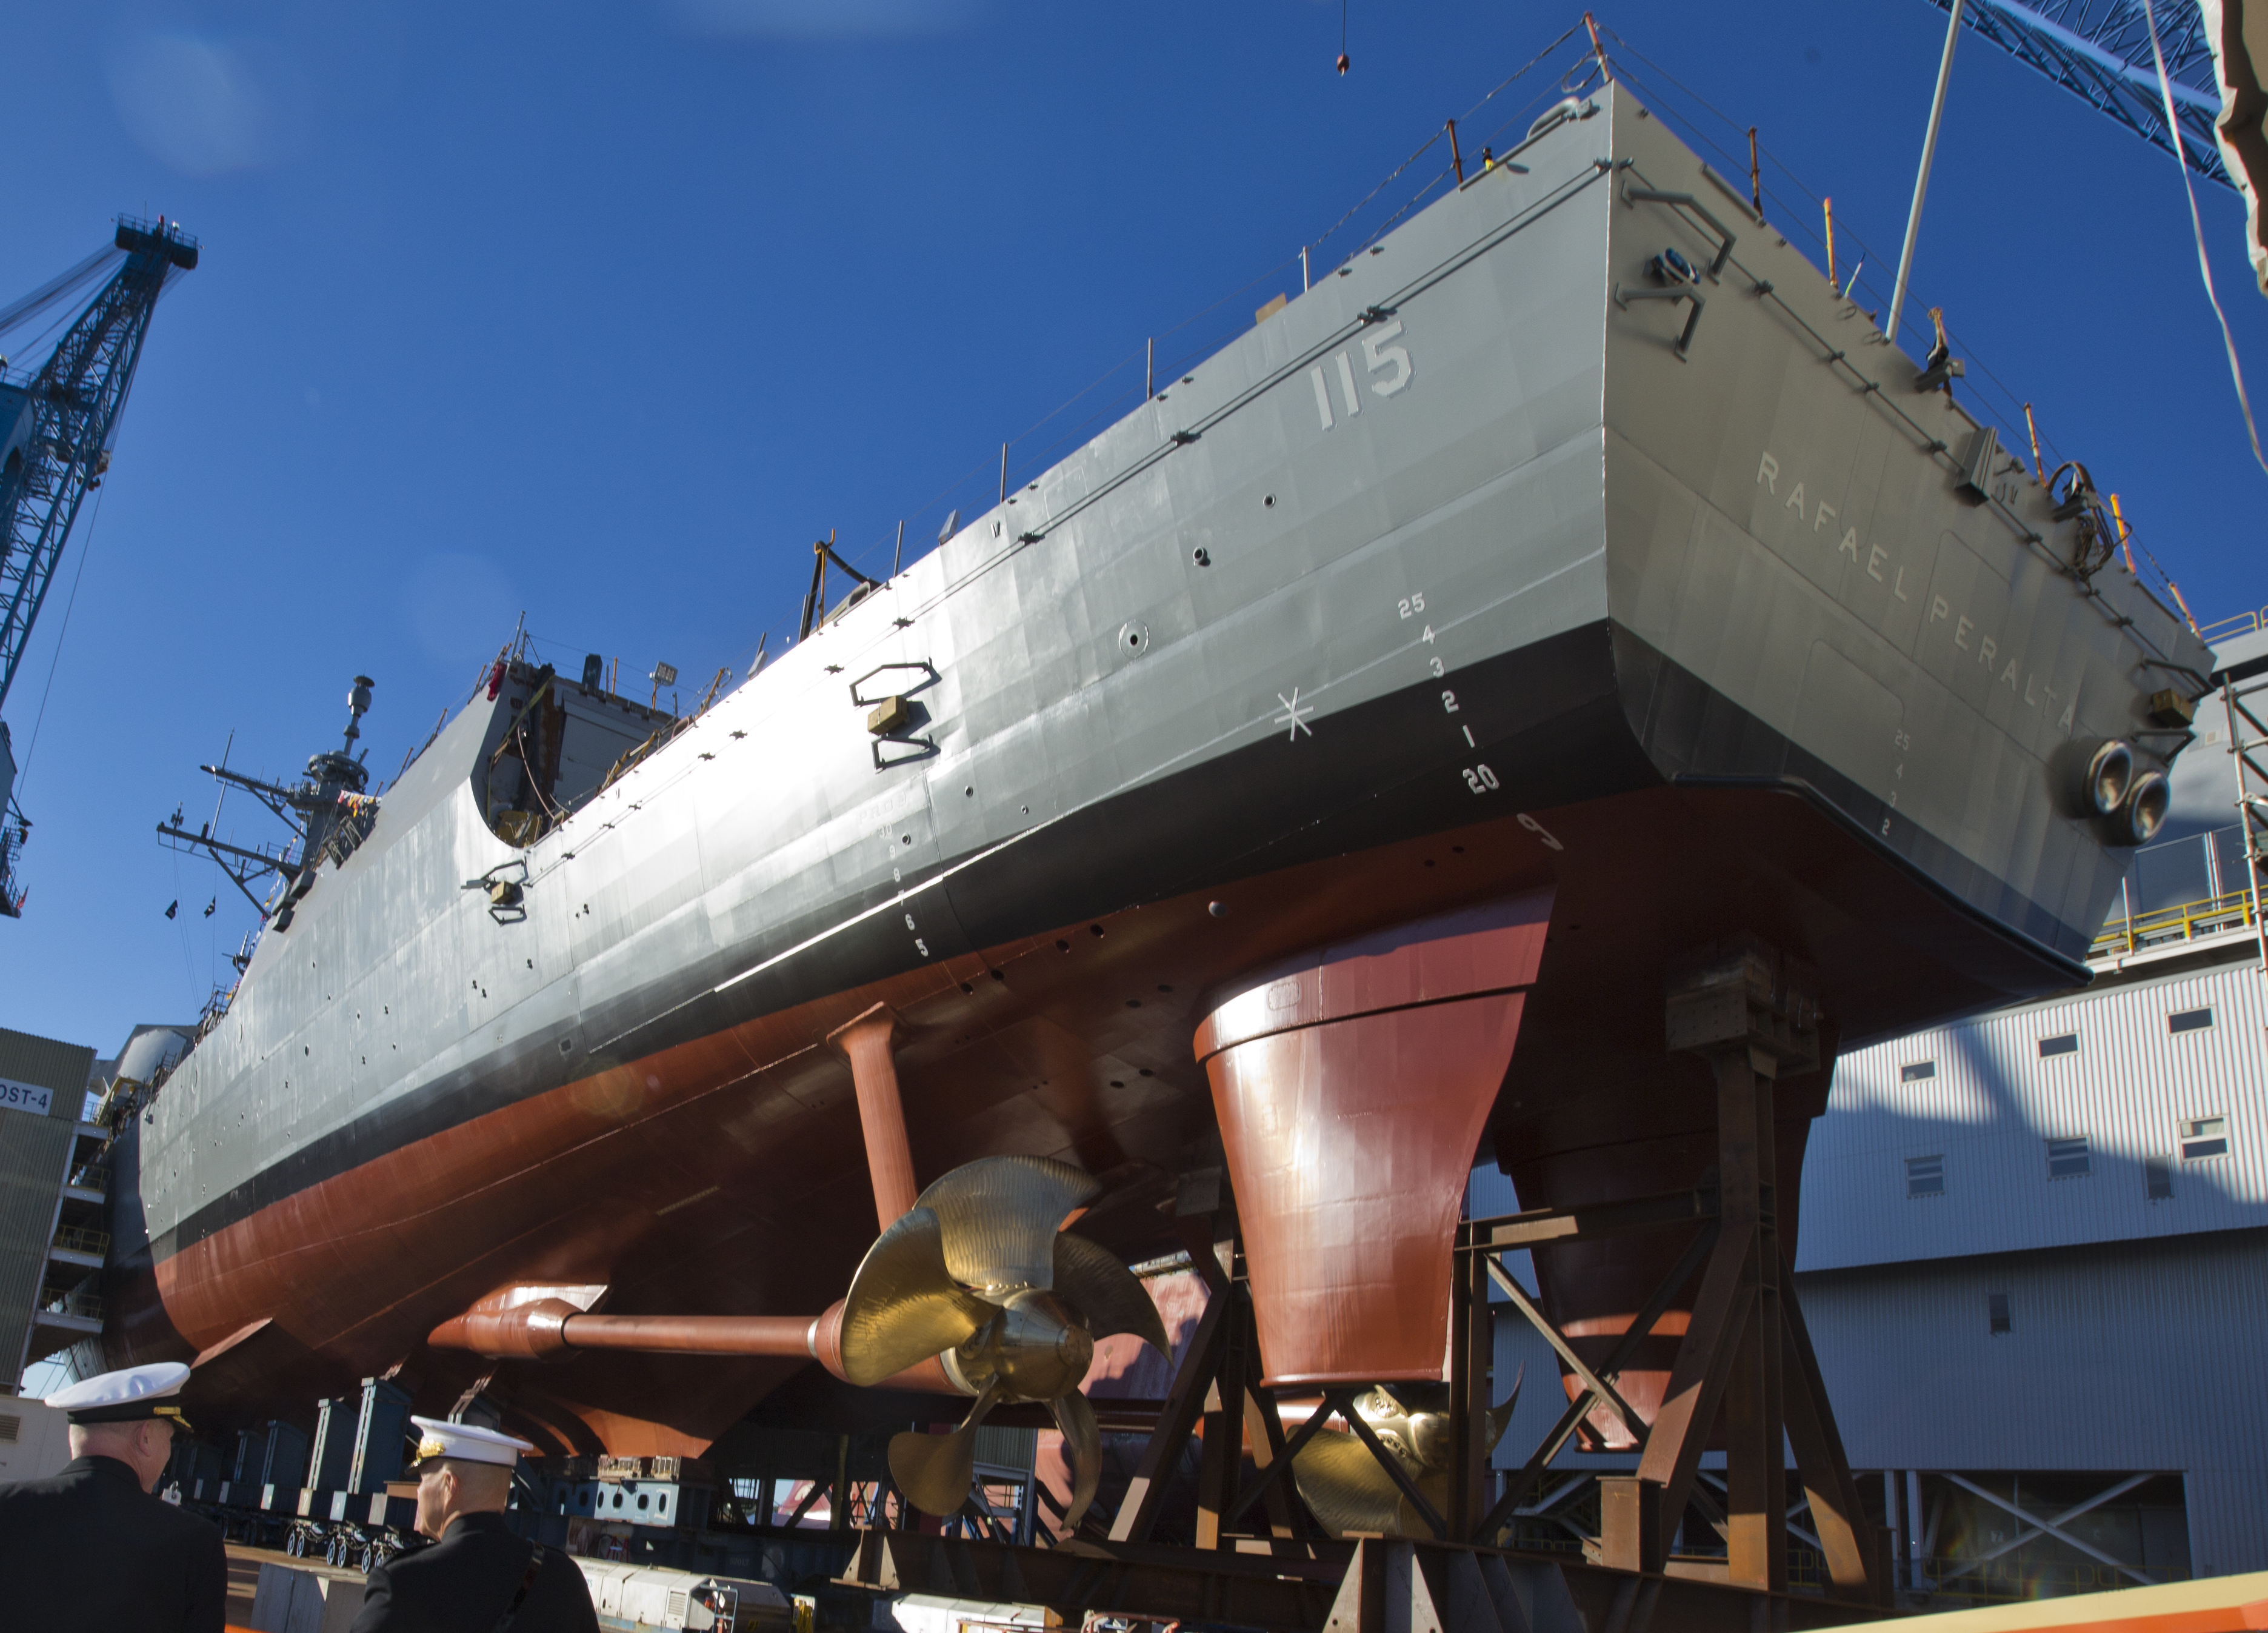 USS Rafael Peralta (DDG-115) before the christening ceremony at General Dynamics Bath Iron Works, Bath, Maine on Oct. 31, 2015. US Marine Corps Photo